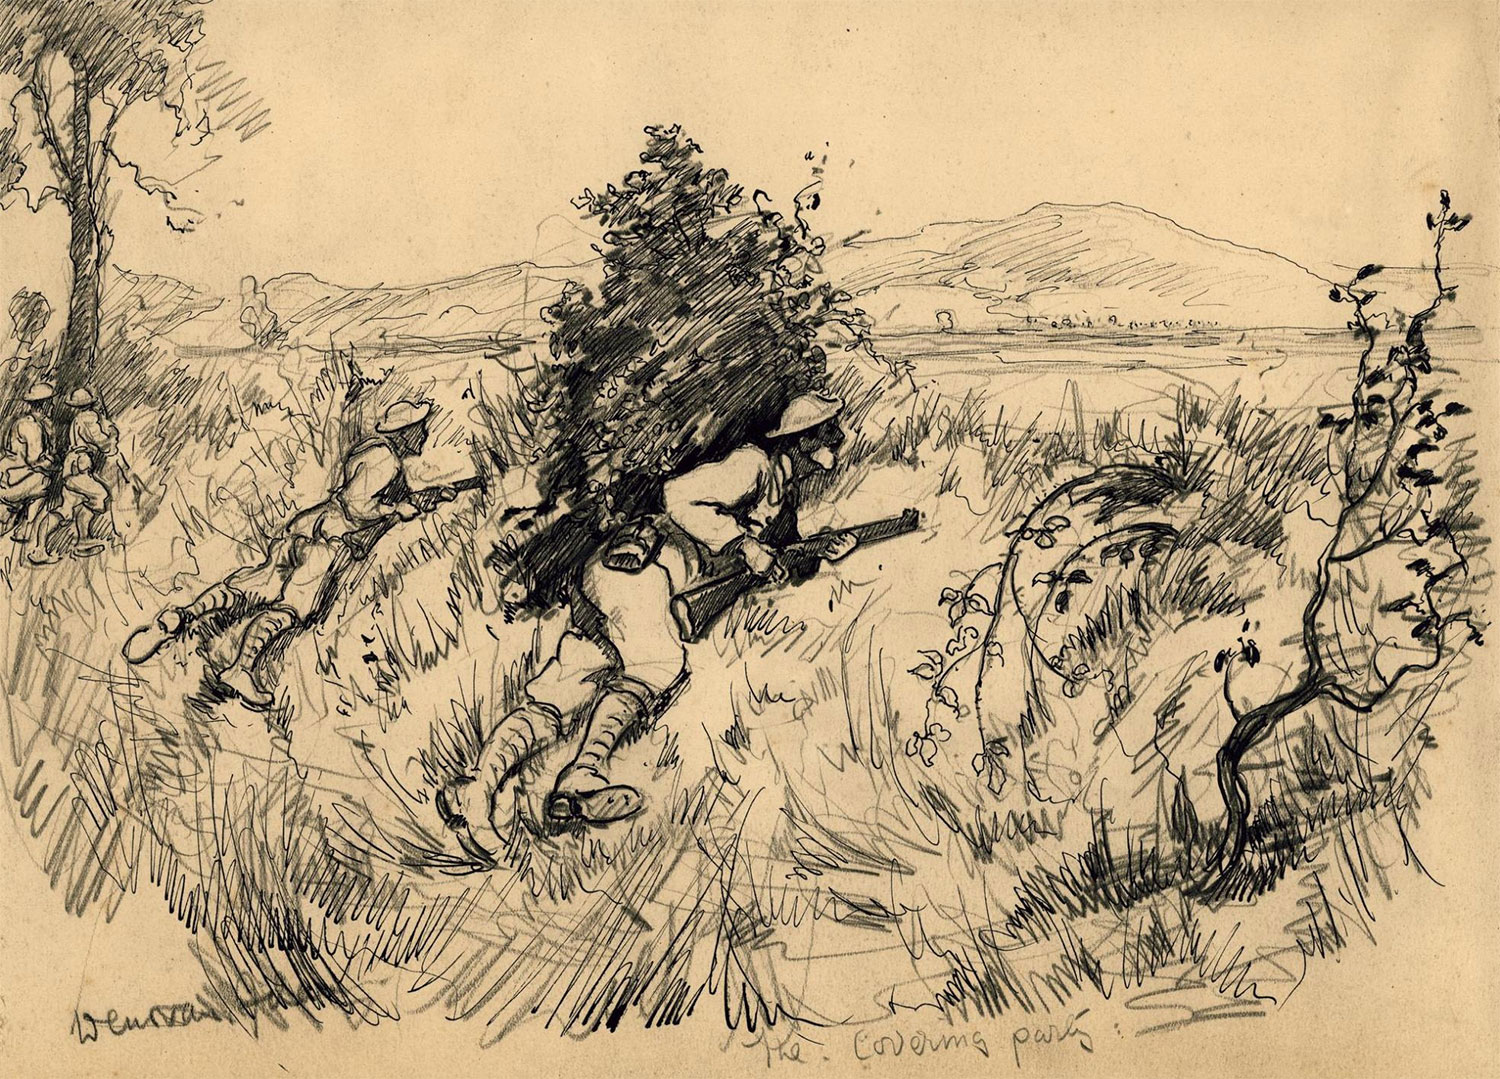 The Covering Party by Lance Corporal Joseph Adam, dated 1918. The Scottish Horse was a part-time yeomanry mounted regiment. During the First World War the regiment served dismounted as an infantry battalion. This is one of a series of drawings depicting the battalion on active service in Salonika, fighting the Bulgarians on the Macedonian Front.